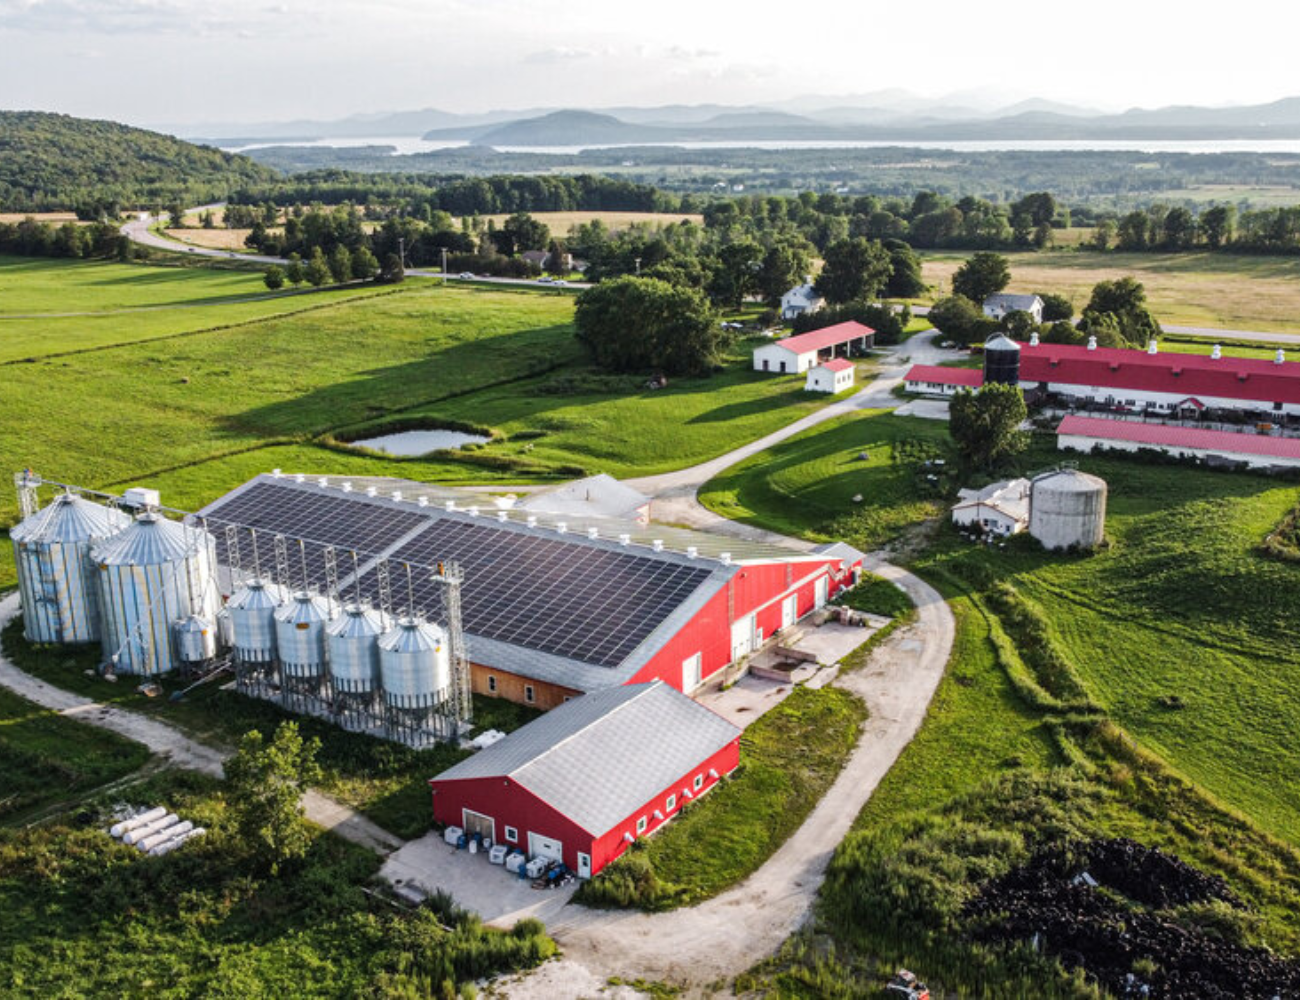 Aerial view of the Earthkeep Farmcommon in Charlotte, Vermont.